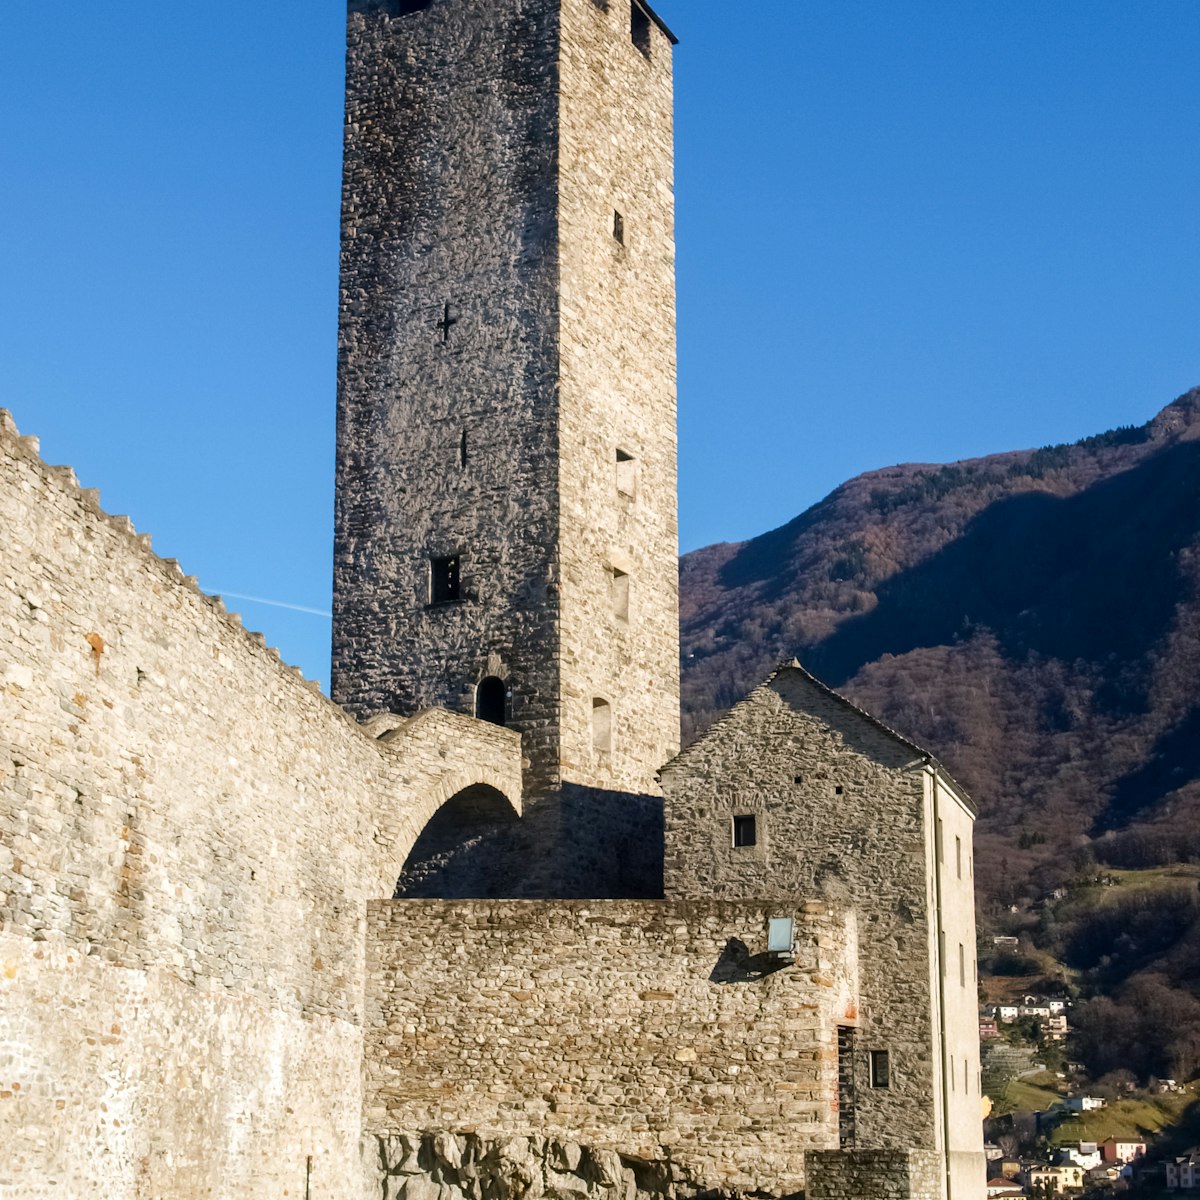 Bellinzona, Switzerland: a tower at Castelgrande with blue sky.
565916194
aged, alps, ancient, architecture, bellinzona, building, castle, church, city, culture, defense, europe, exterior, fort, fortress, hill, historic, historical, history, house, landmark, medieval, monument, mountain, old, outdoor, rock, ruins, stone, swiss, switzerland, ticino, tourism, tourist, tower, town, travel, urban, wall